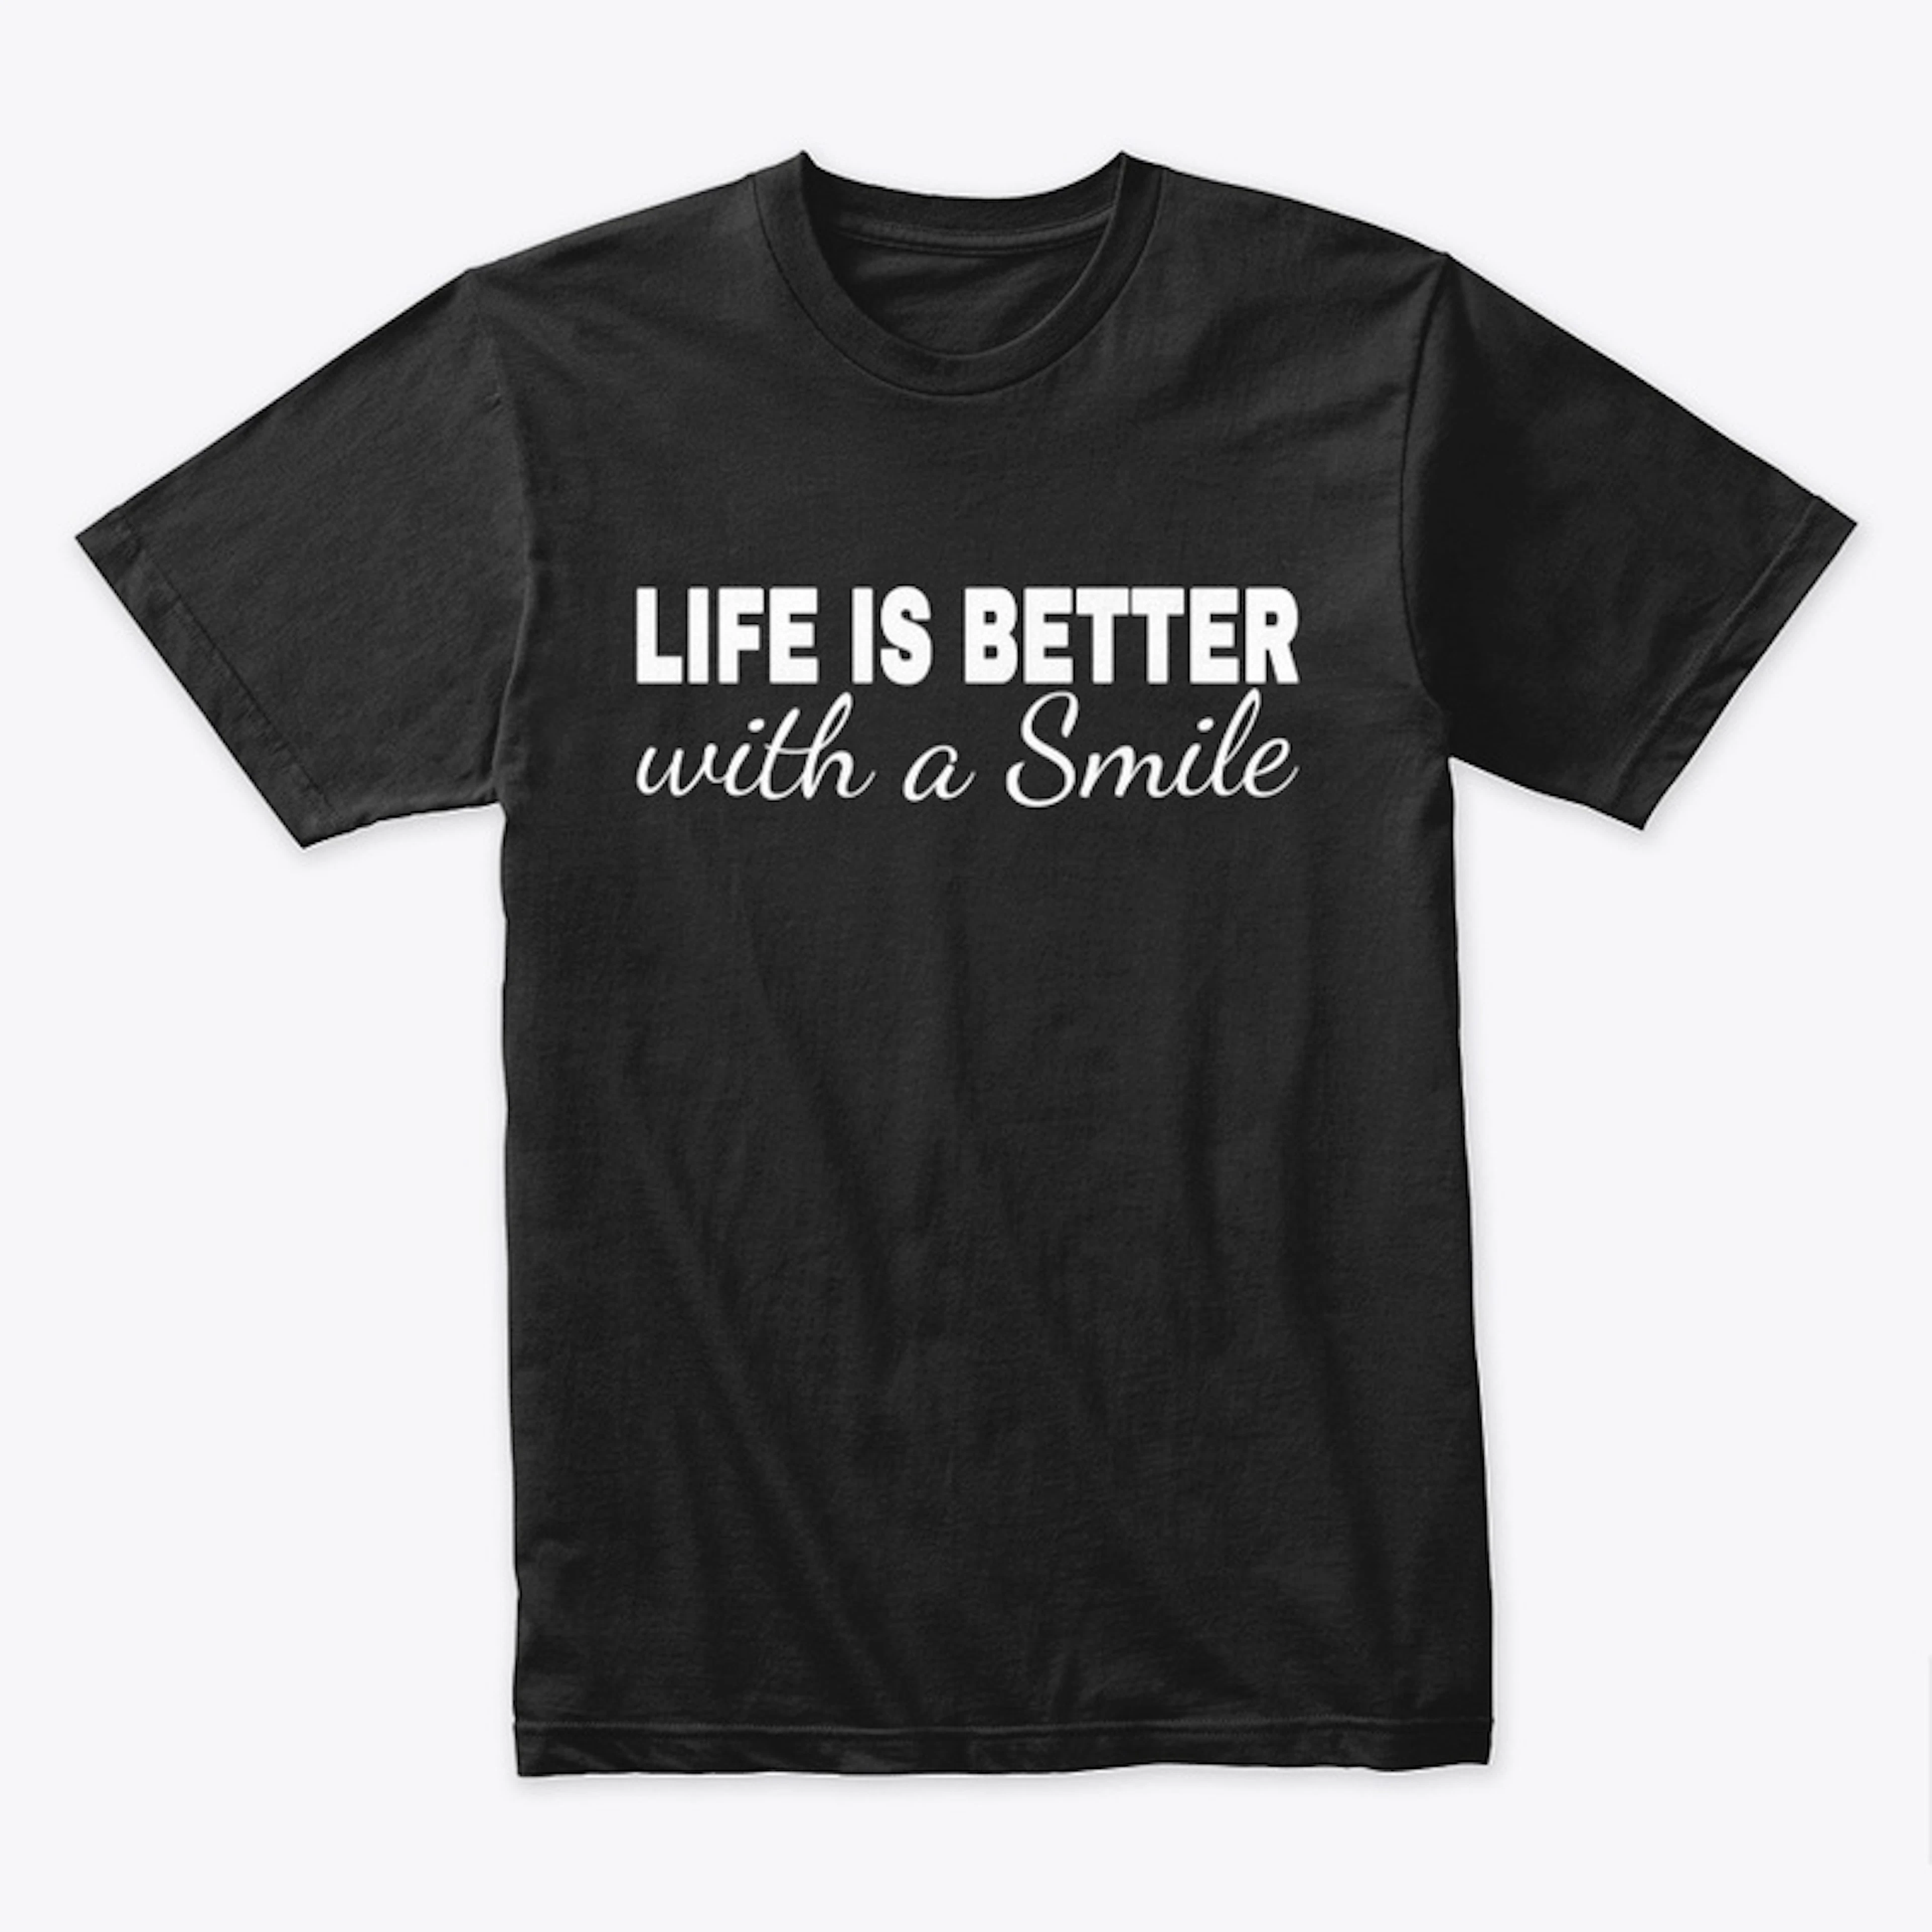 Life is Better with a Smile Shirt